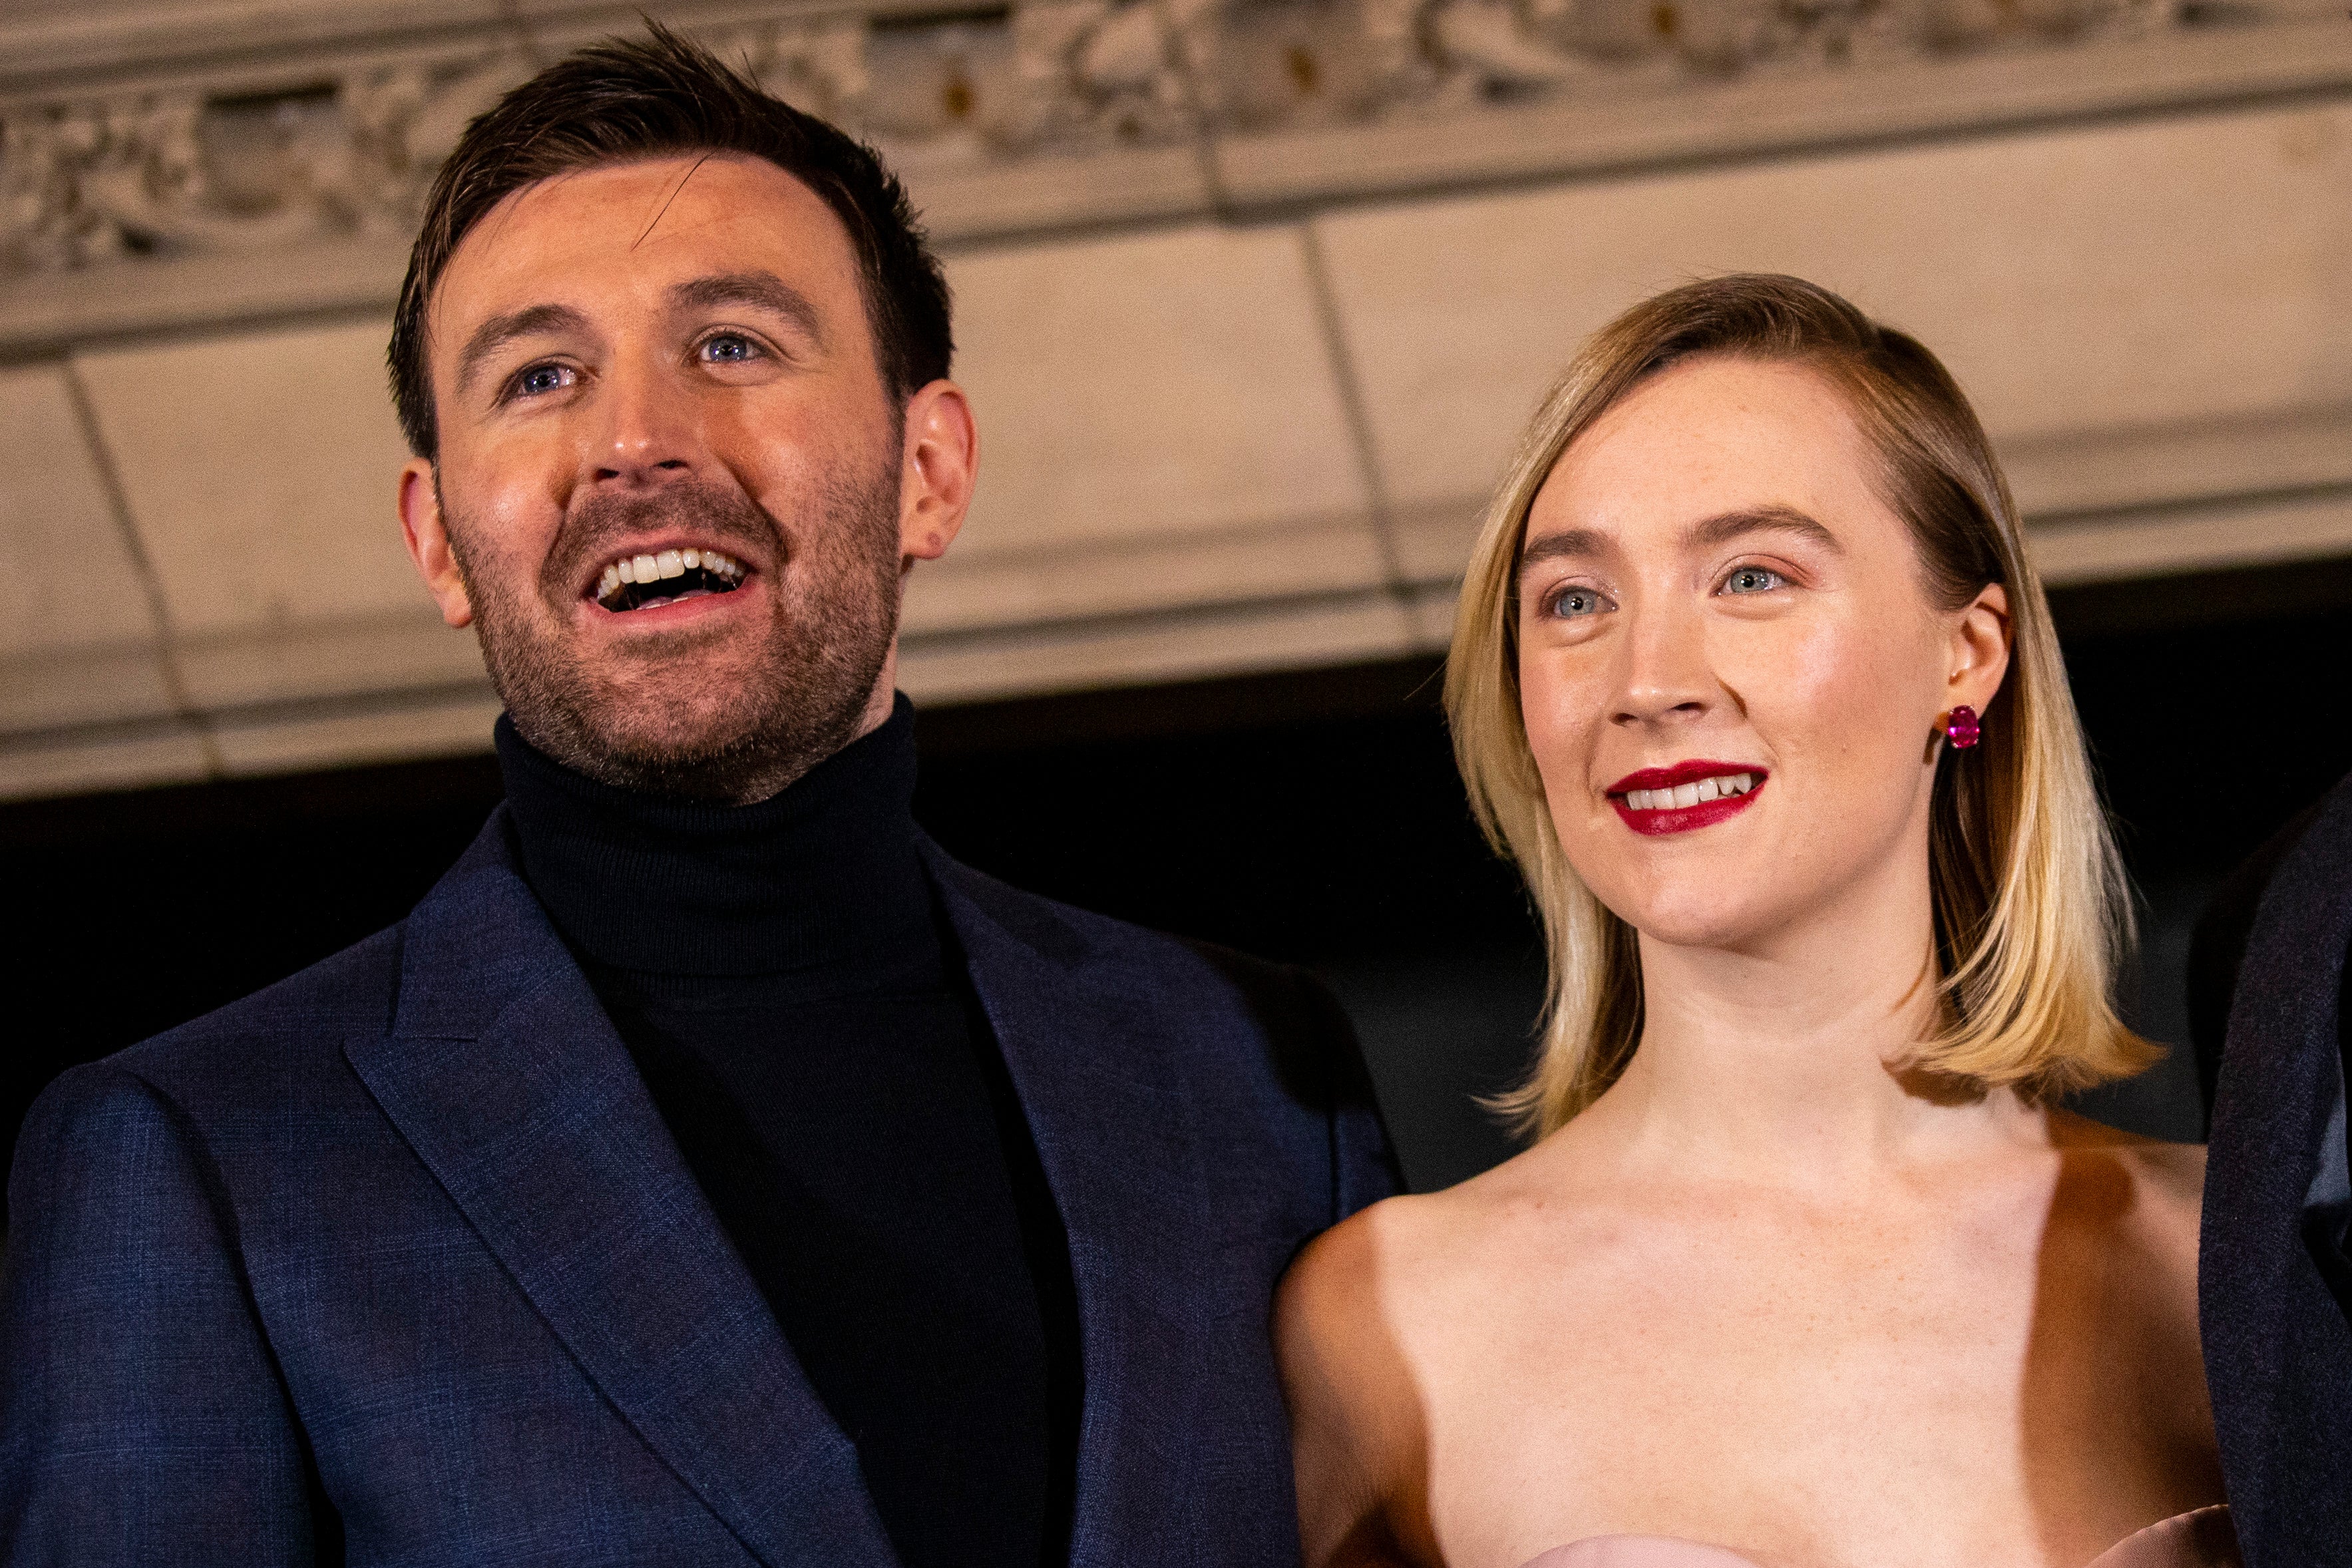 McArdle and Ronan worked together on 2018’s Mary Queen of Scots